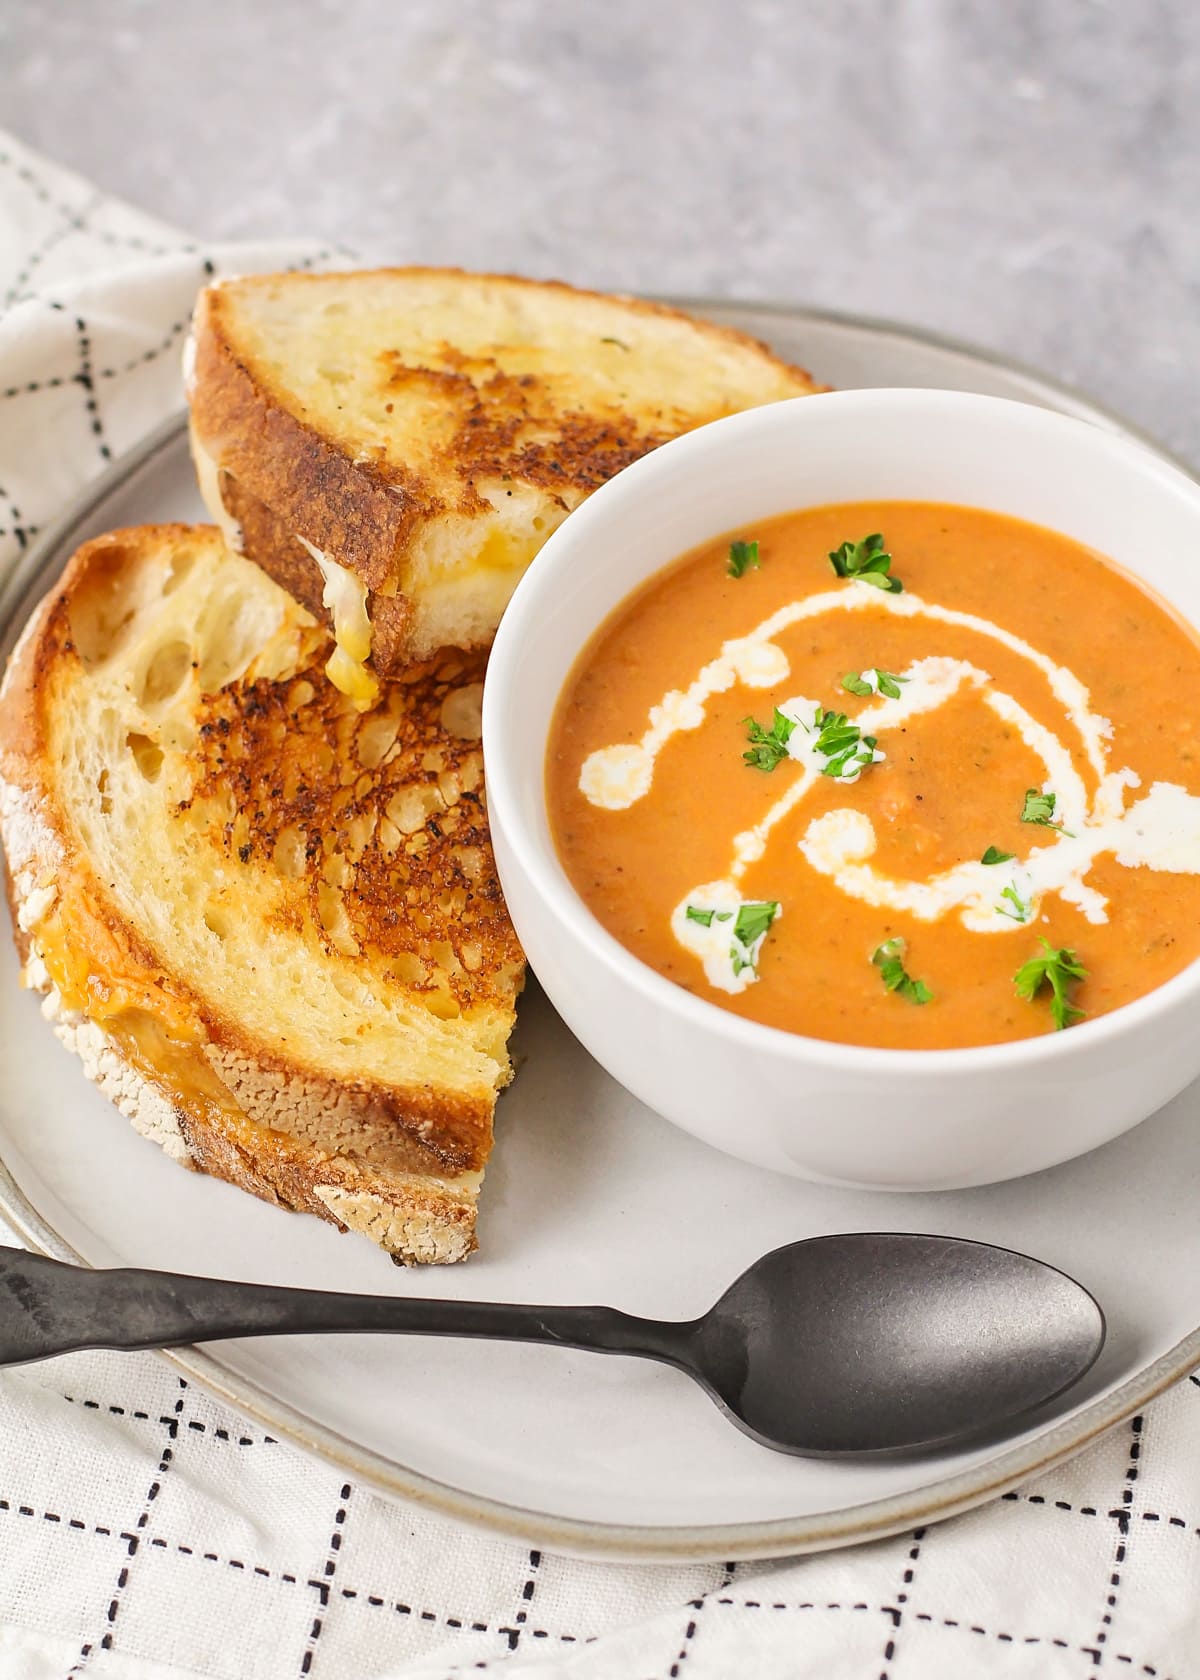 Grilled cheese and tomato soup recipe on plate.